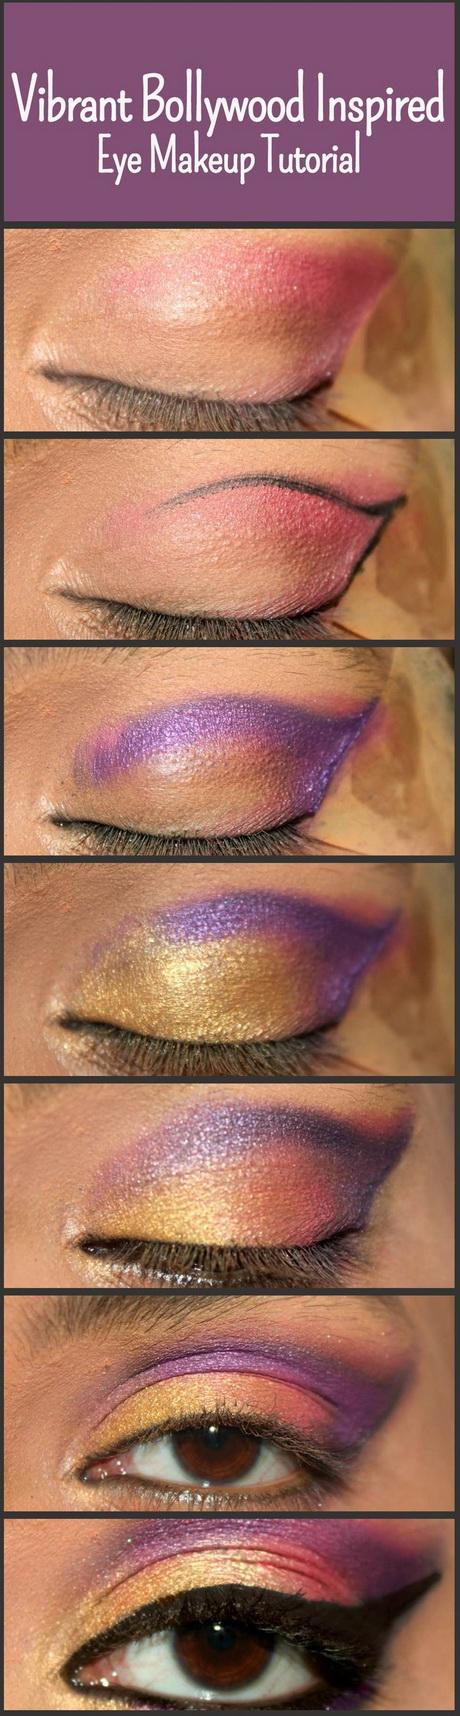 glossy-makeup-step-by-step-34_8 Glanzende make-up stap voor stap